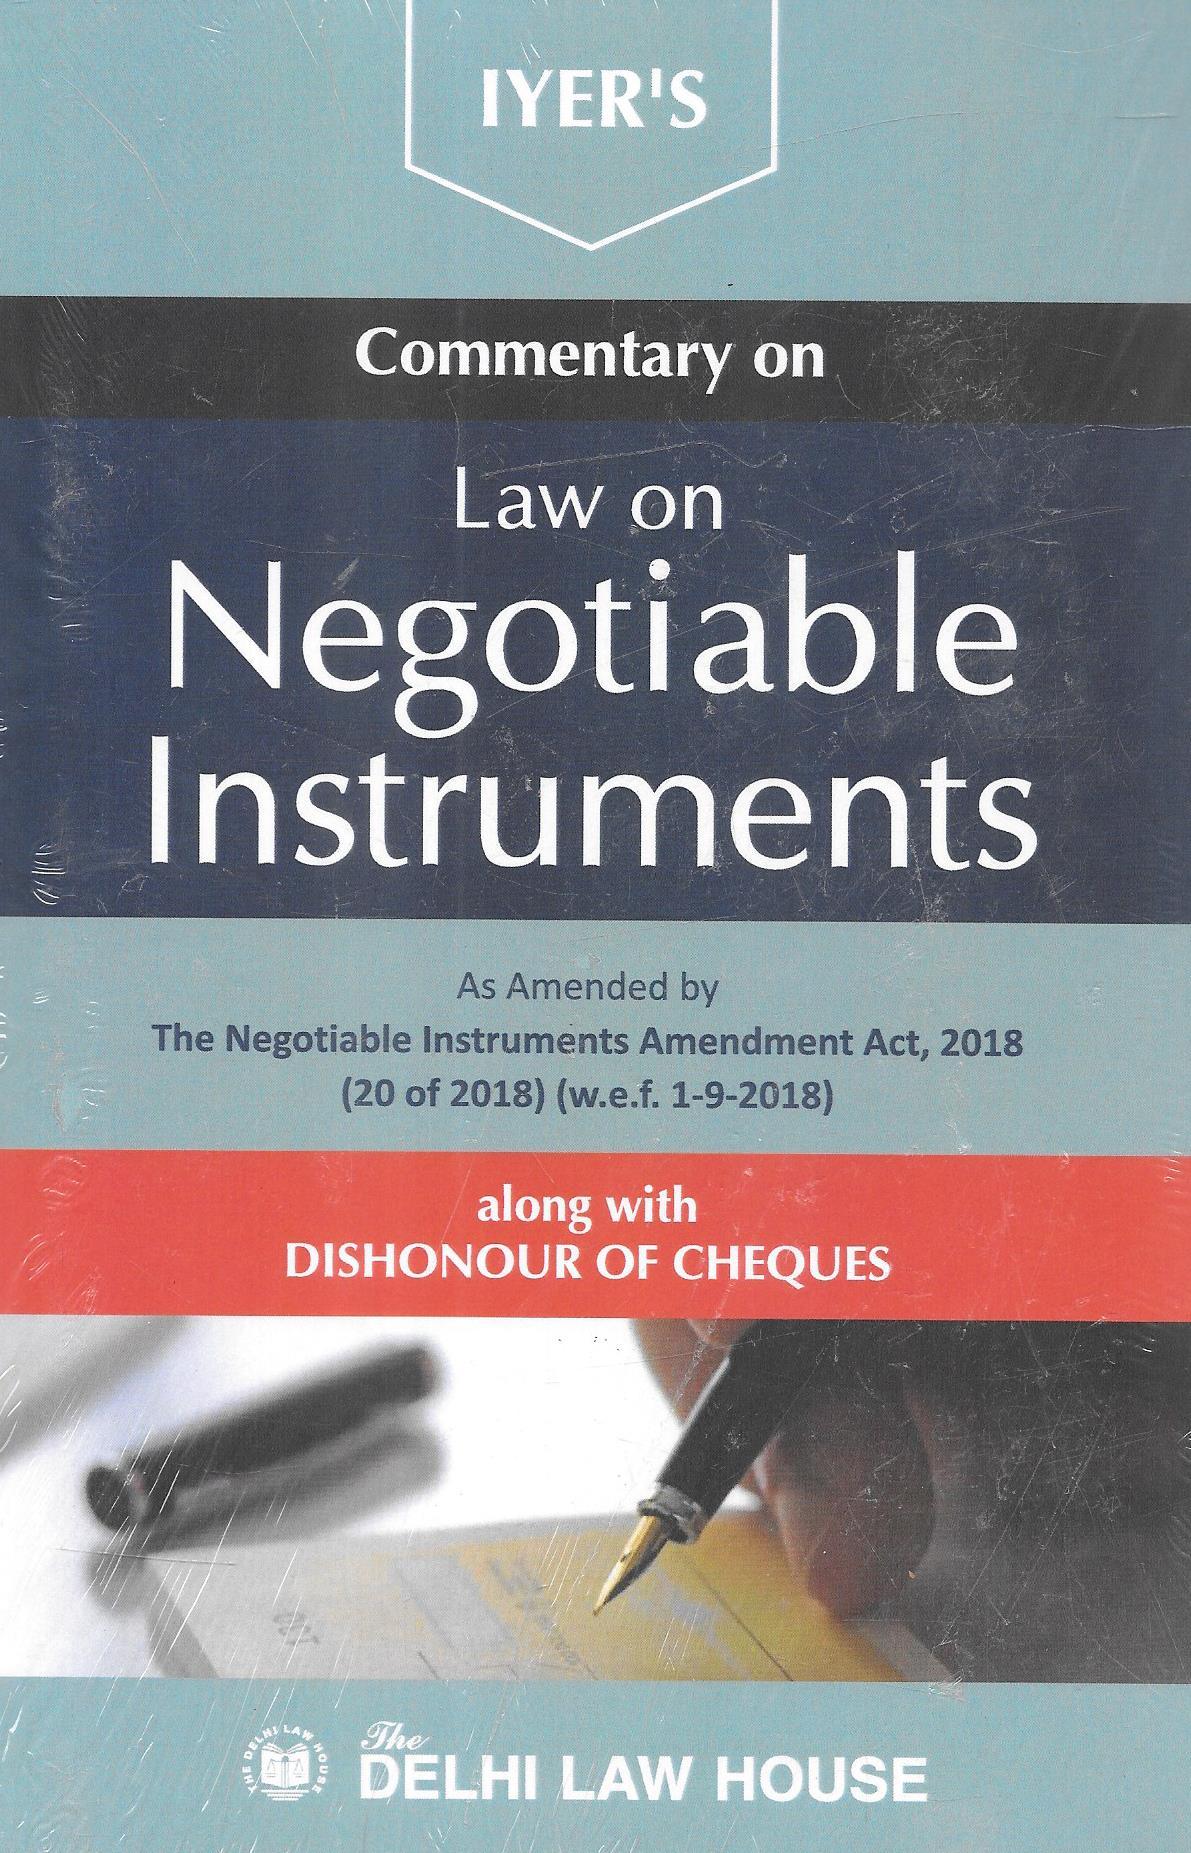 Commentary on Law on Negotiable Instruments